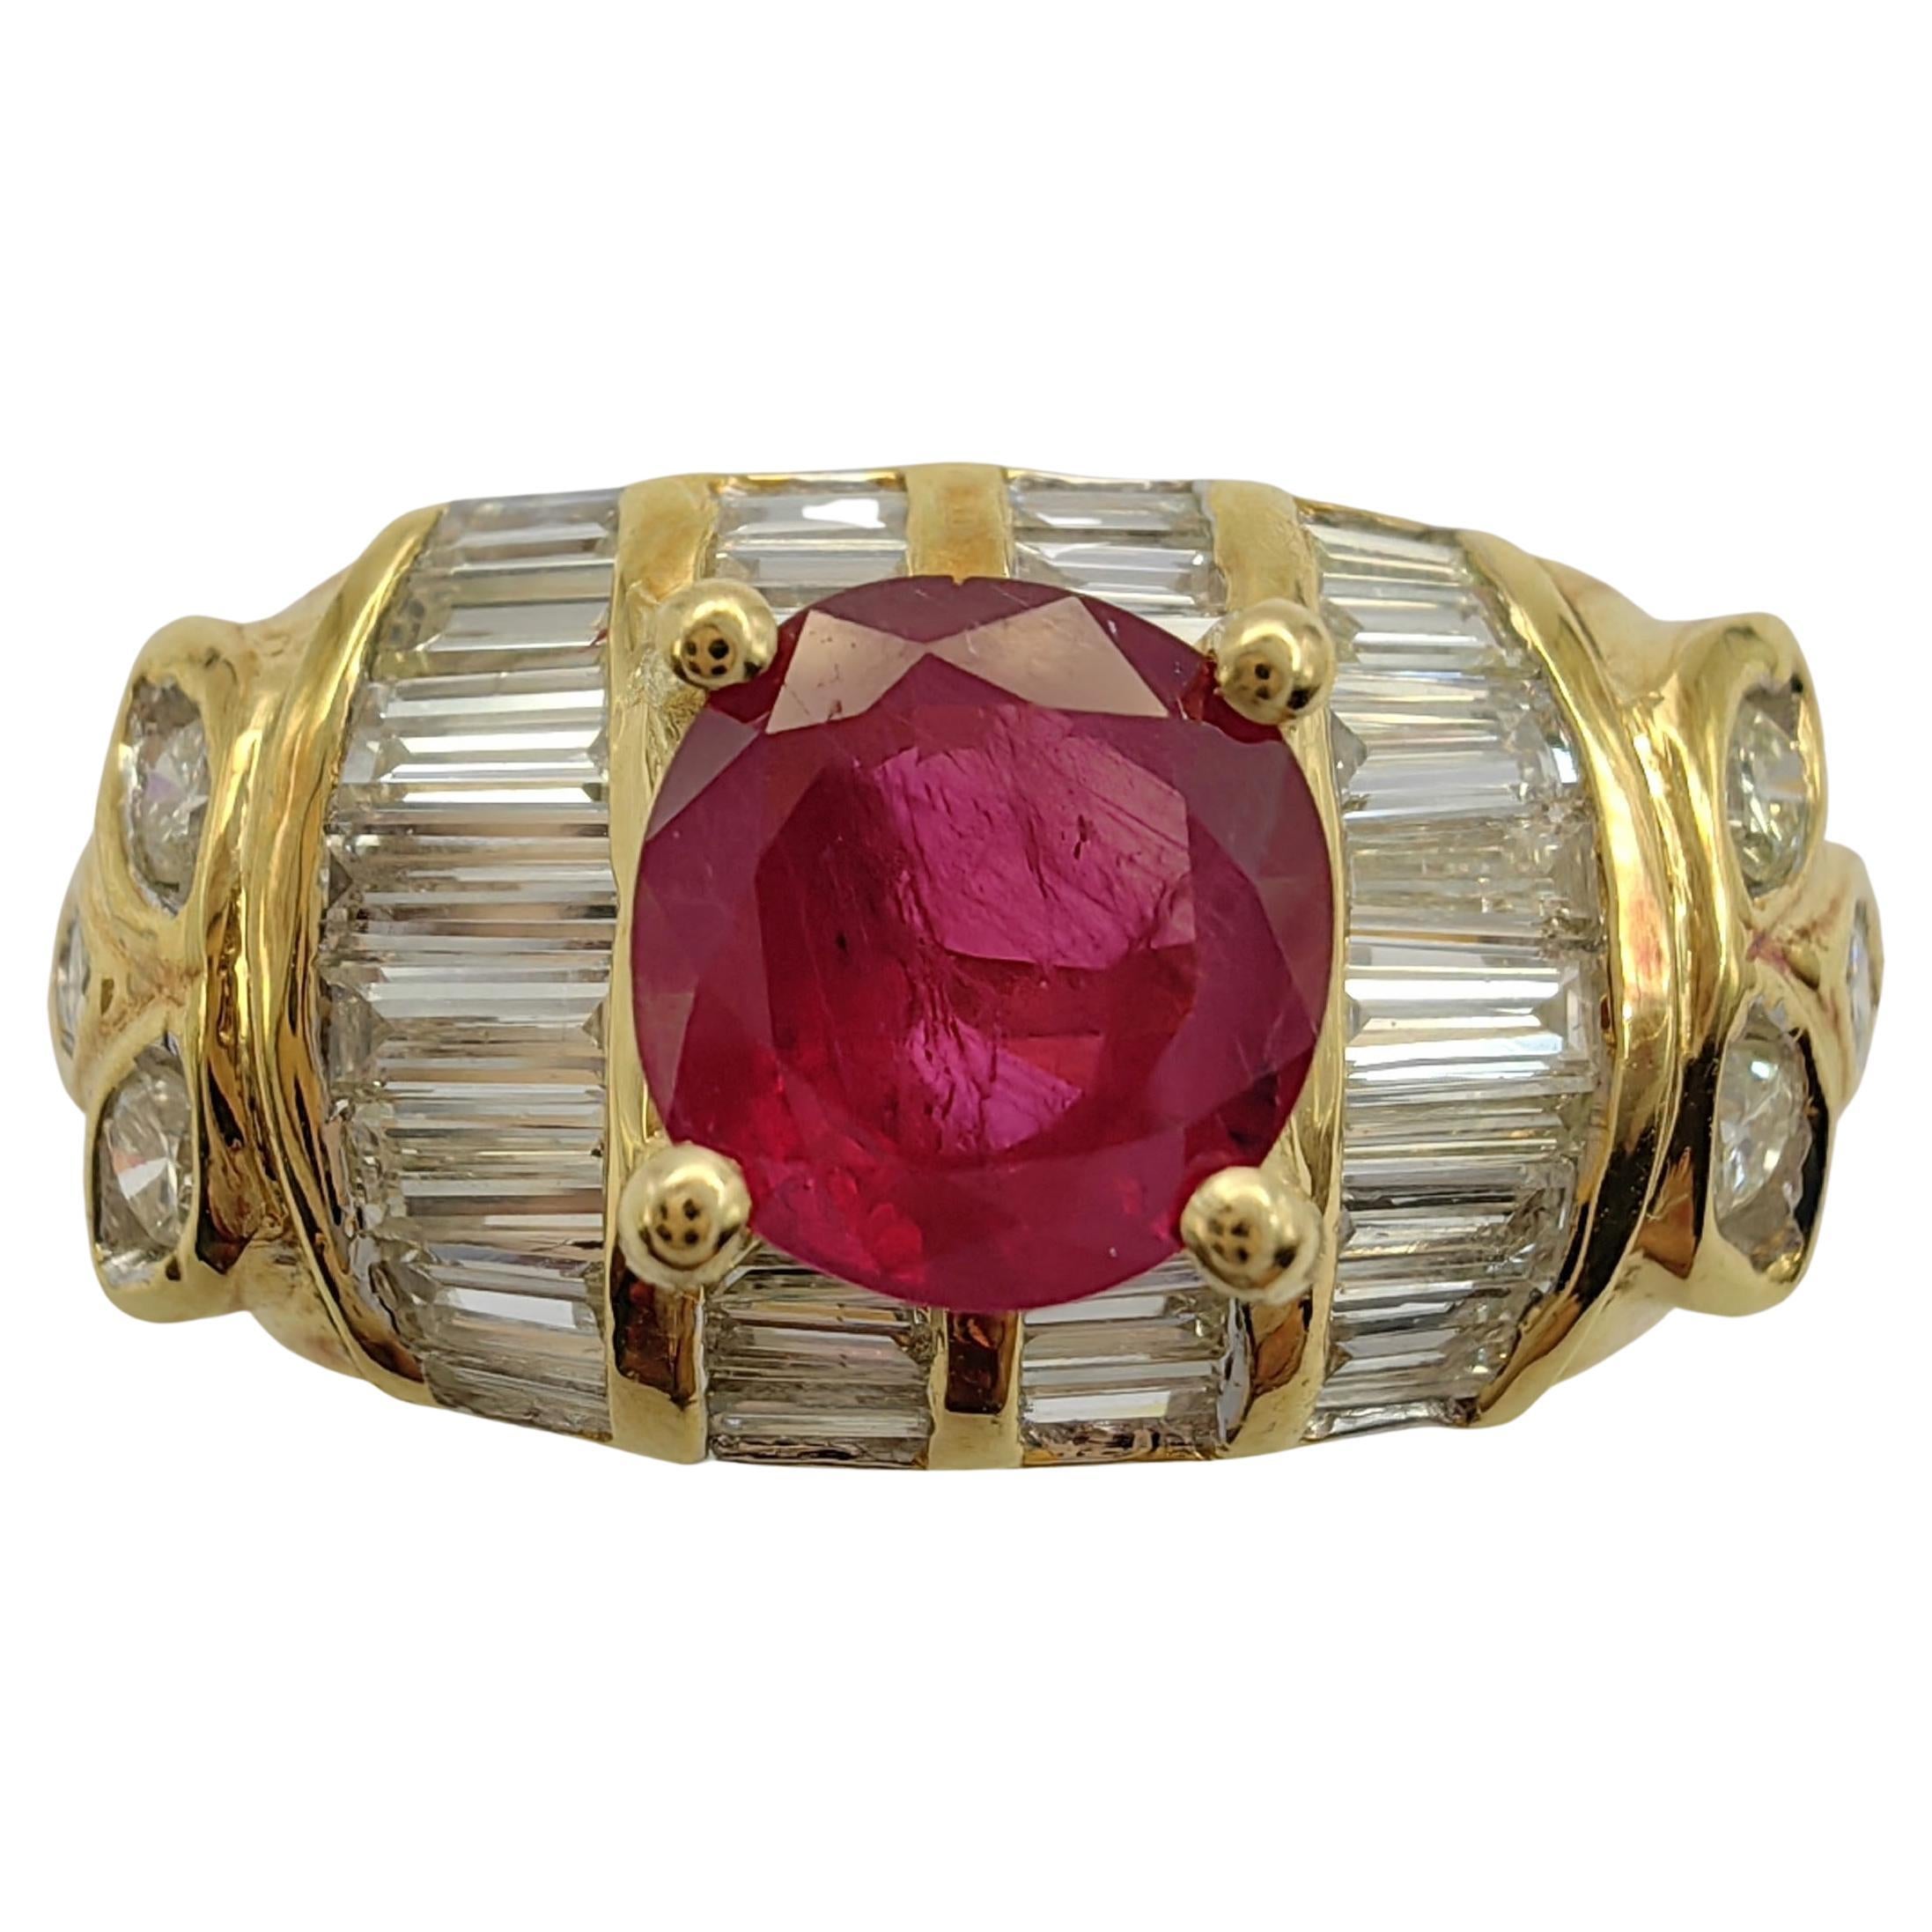 Vintage Art Deco Round-cut Ruby Tapered Baguette Diamond Ring in 20K Yellow Gold